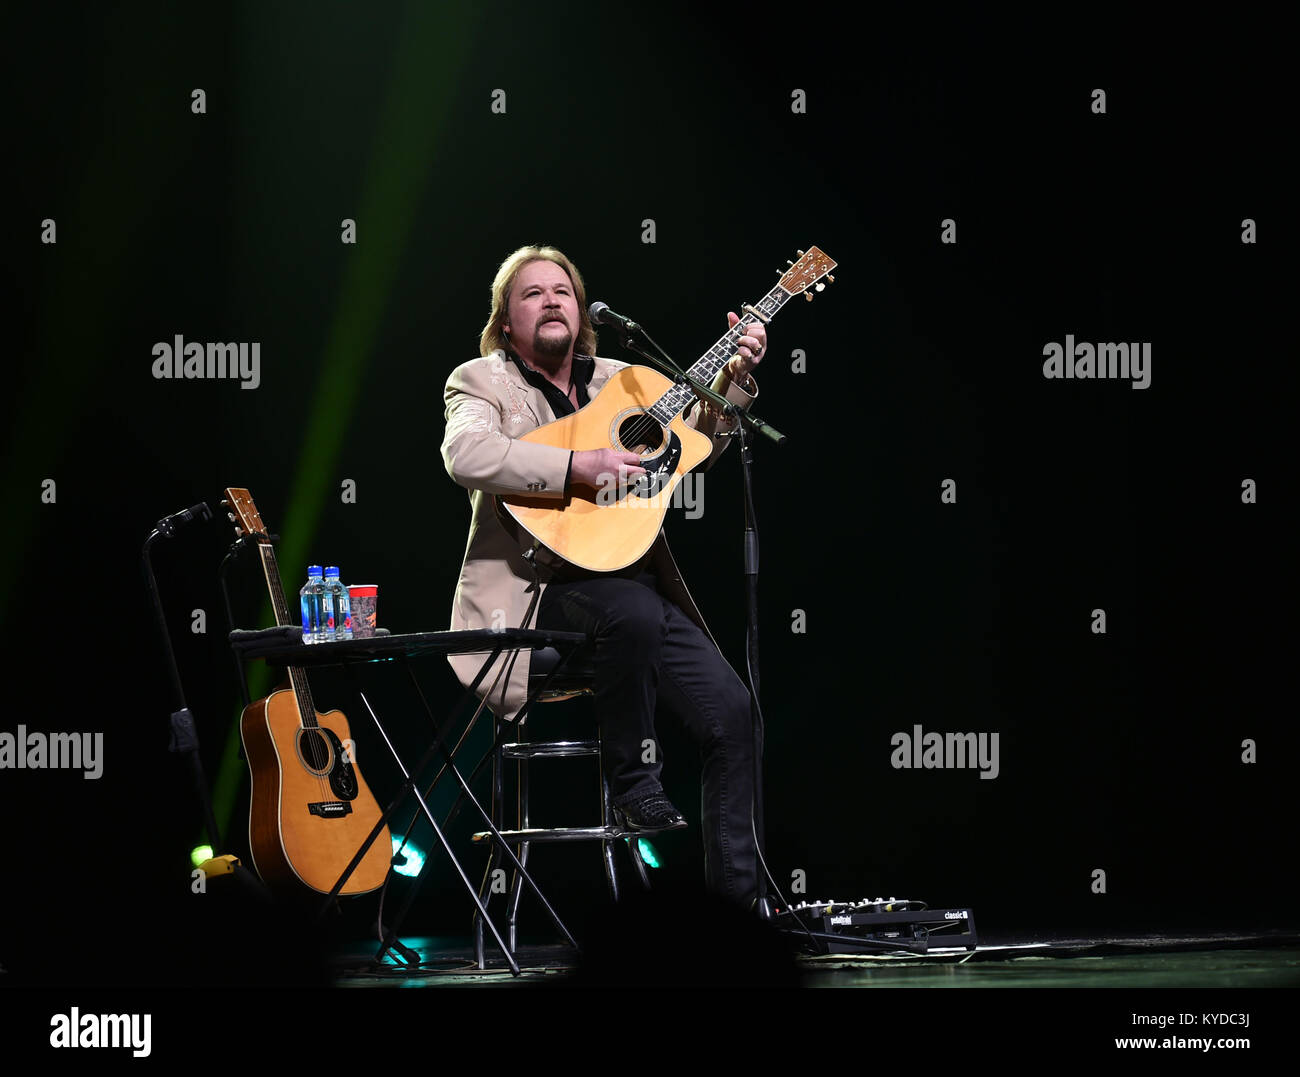 Virginia Beach, VIRGINIA, USA. 12th Jan, 2018. TRAVIS TRITT brings his brand of rocking country to the SANDLER CENTER in VIRGINIA BEACH, VIRGINIA on 12 JANUARY 2018. © Jeff Moore 2018 Credit: Jeff Moore/ZUMA Wire/Alamy Live News Stock Photo